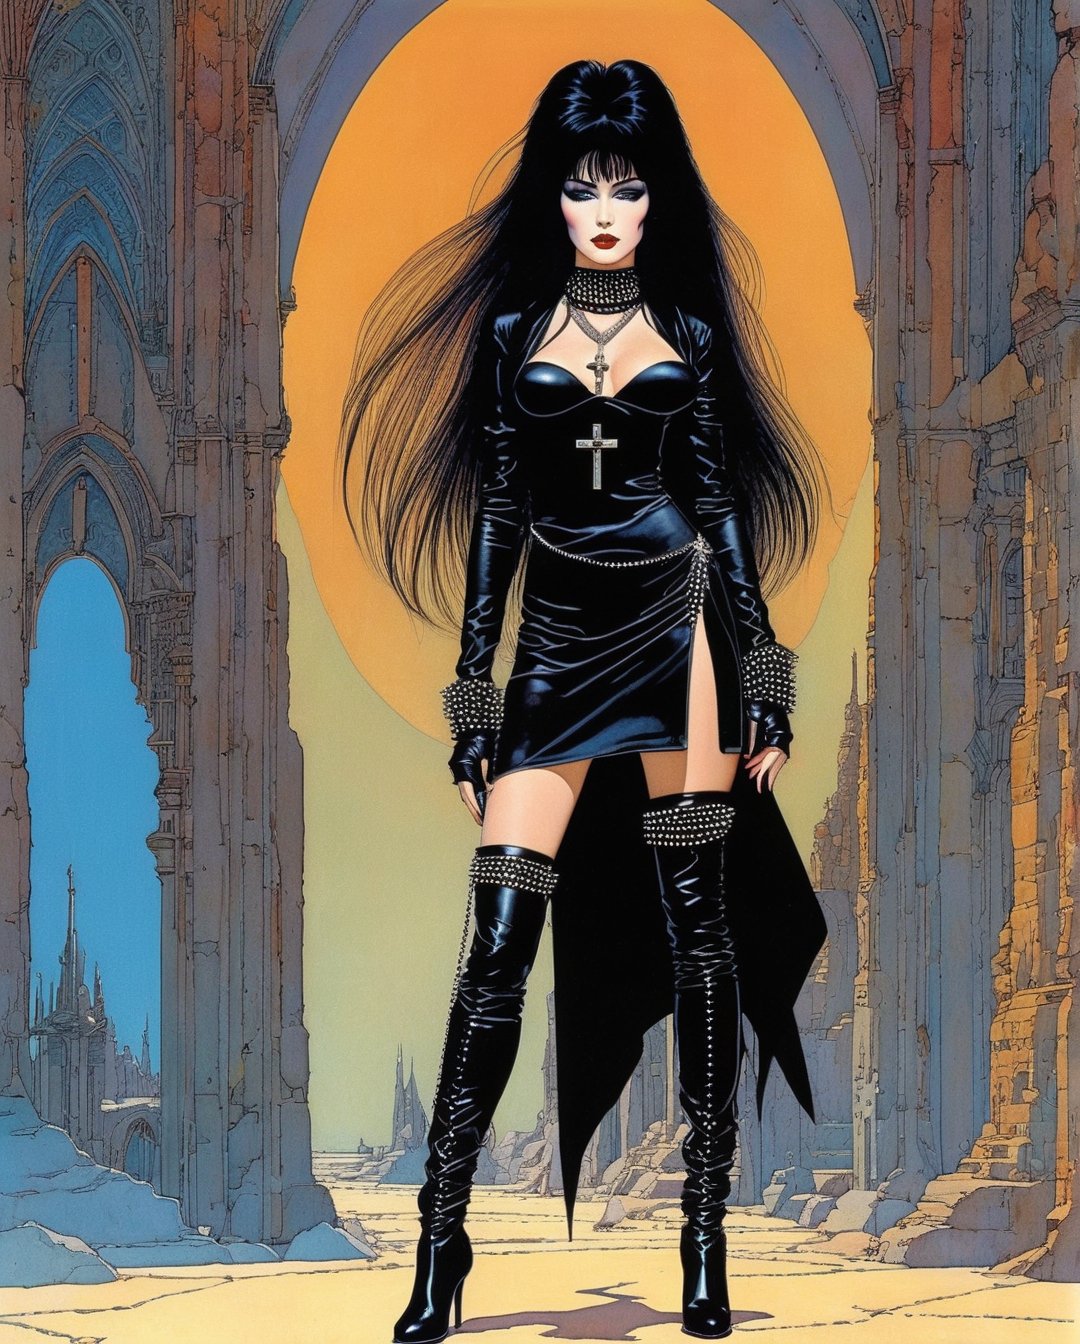 Moebius (Jean Giraud) Style - A picture by Jean Giraud Moebius, ((masterpiece)), ((best quality)), (masterpiece, highest quality), Goth woman, Siouxsie Sioux, long black hair with bangs, Cross rosary, cross pendants, spike choker, spike bracelet, black outfit, fishnet stockings, black platform boots, full body. art style by Moebius